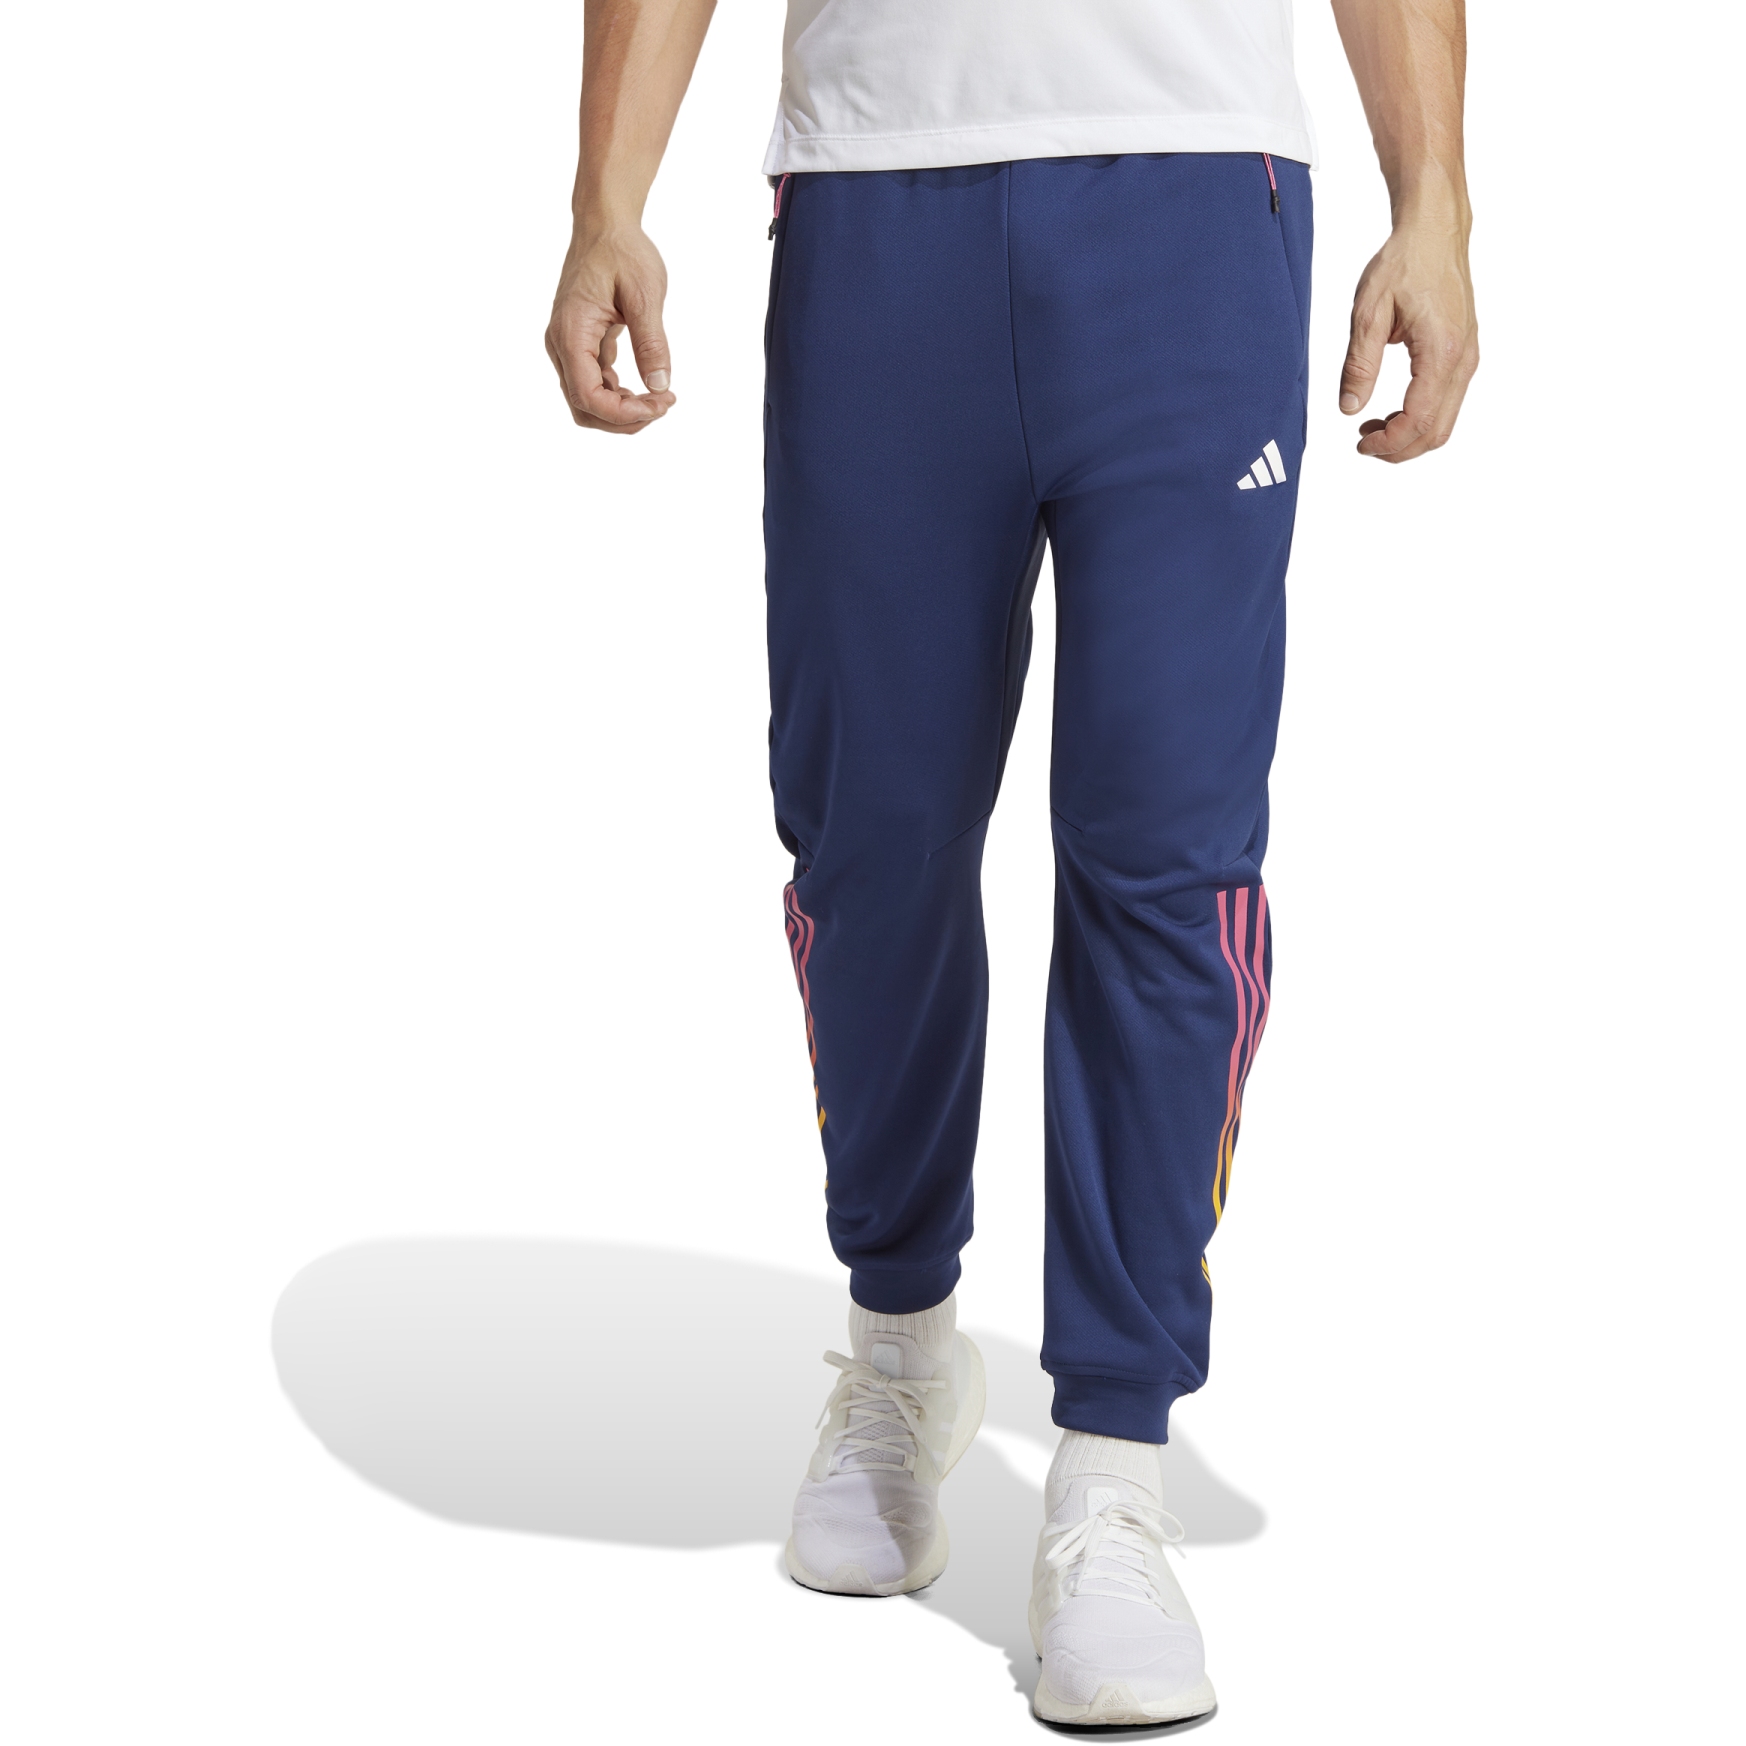 Adidas Track Pants 90s Gym Jogging Running Navy Blue Striped, Shop Exile